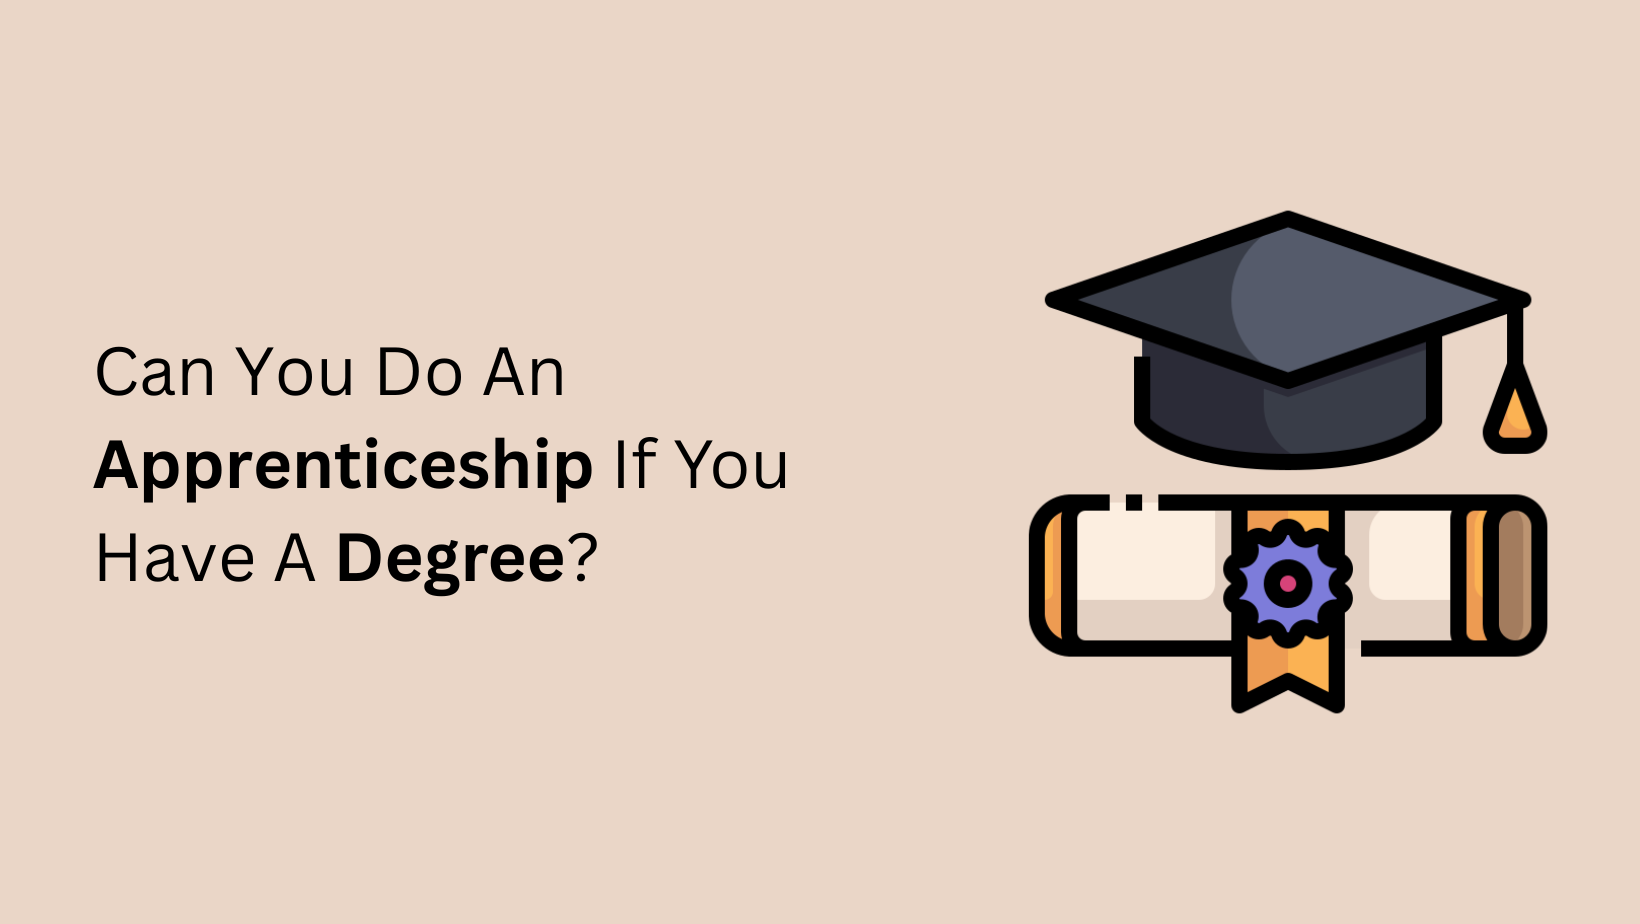 Can You Do An Apprenticeship If You Have A Degree